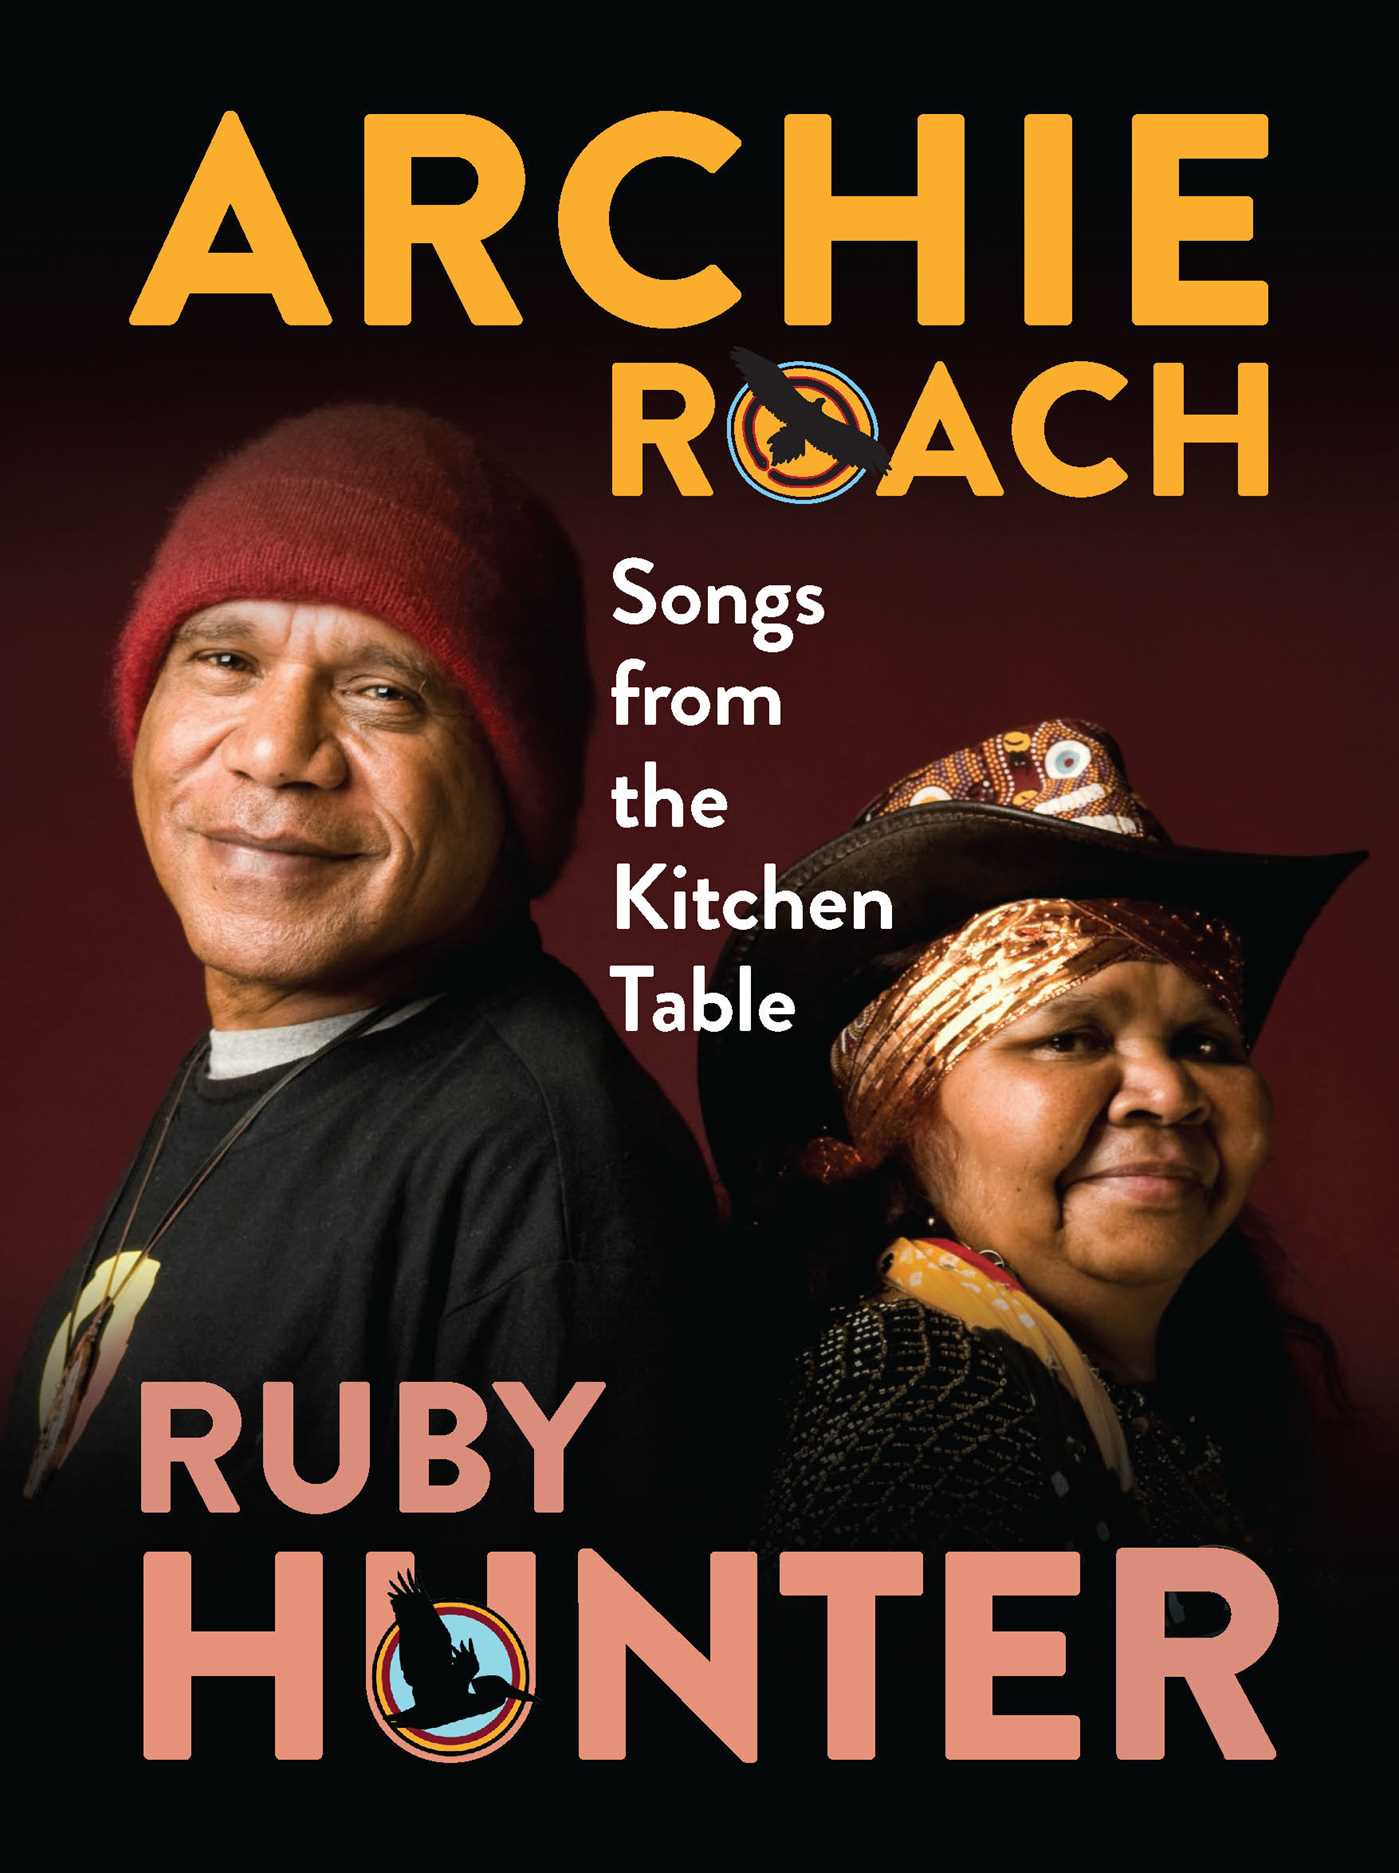 archie roach songs from the kitchen table